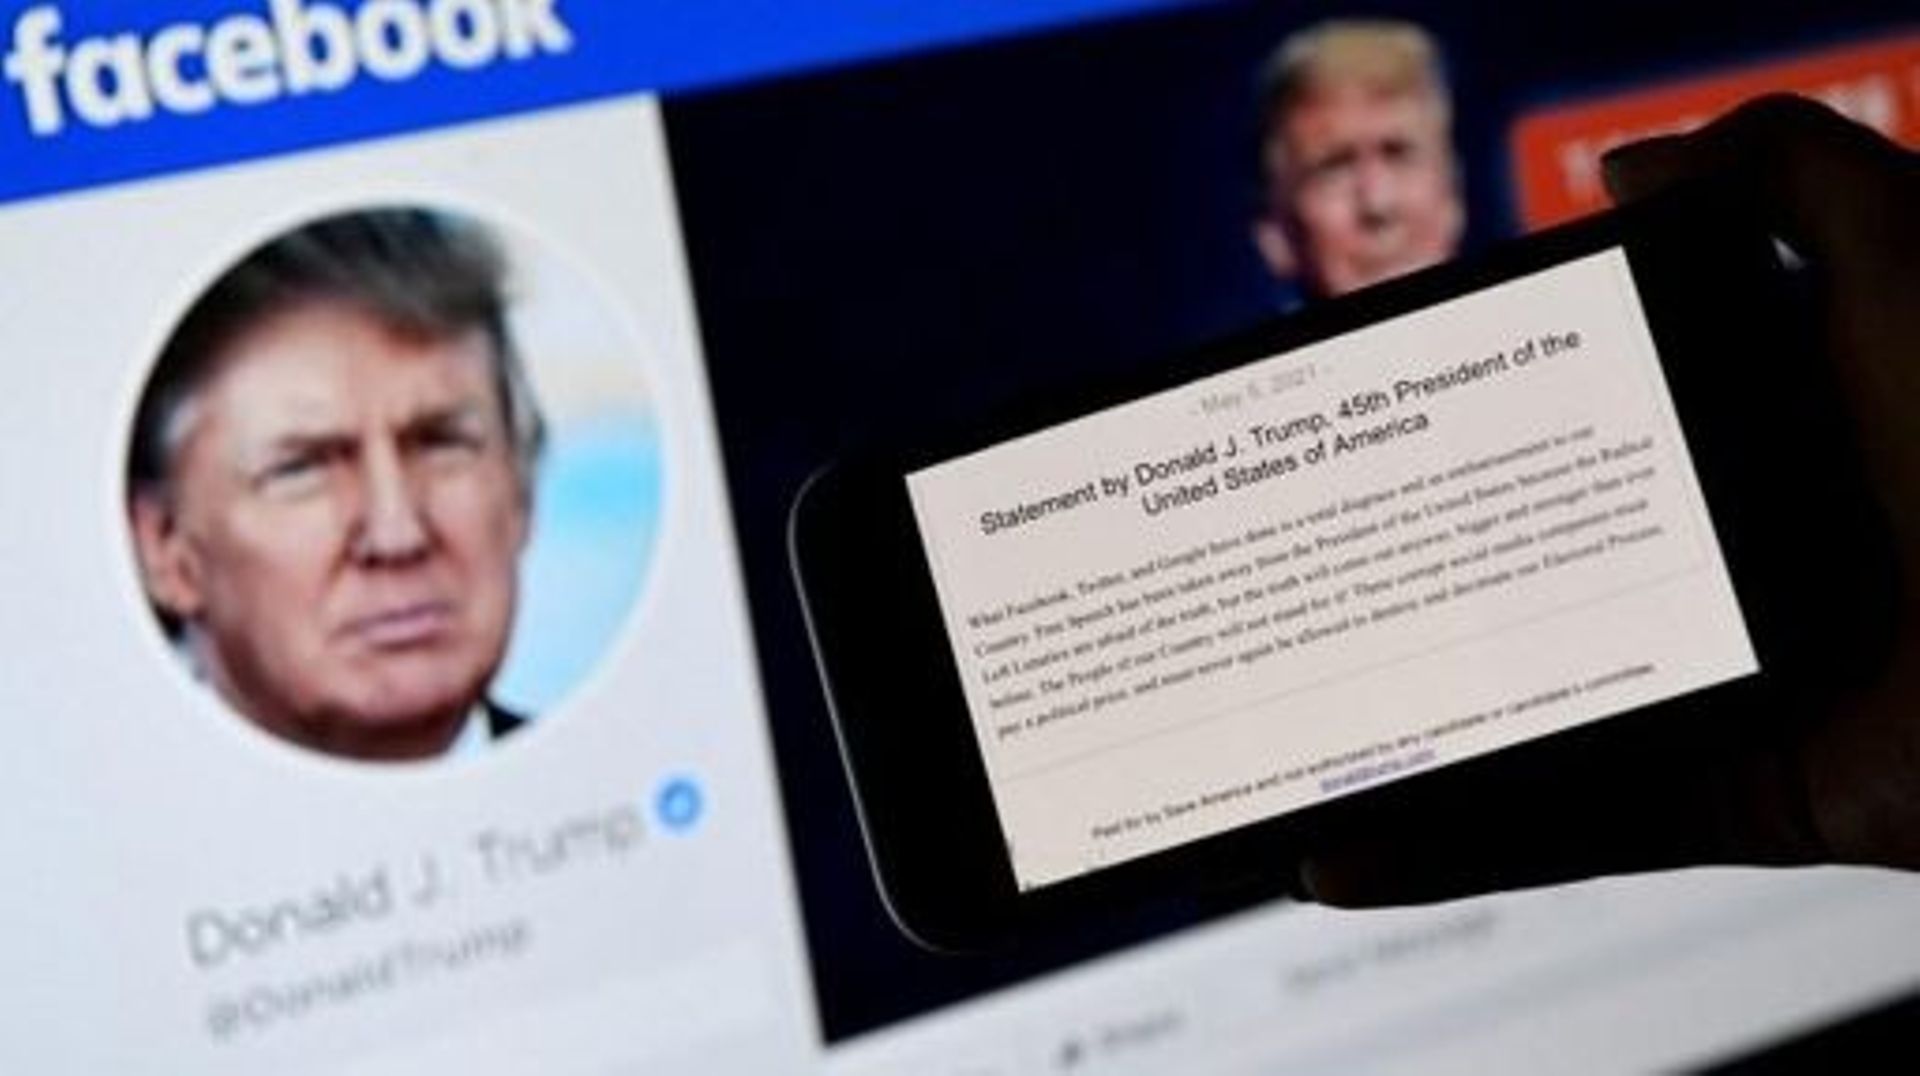 In this photo illustration, a phone screen displays the statement of former US President Donald Trump on his Facebook page background, on May 5, 2021, in Arlington, Virginia. Donald Trump said May 5, 2021 it was a total disgrace for online giants to insti